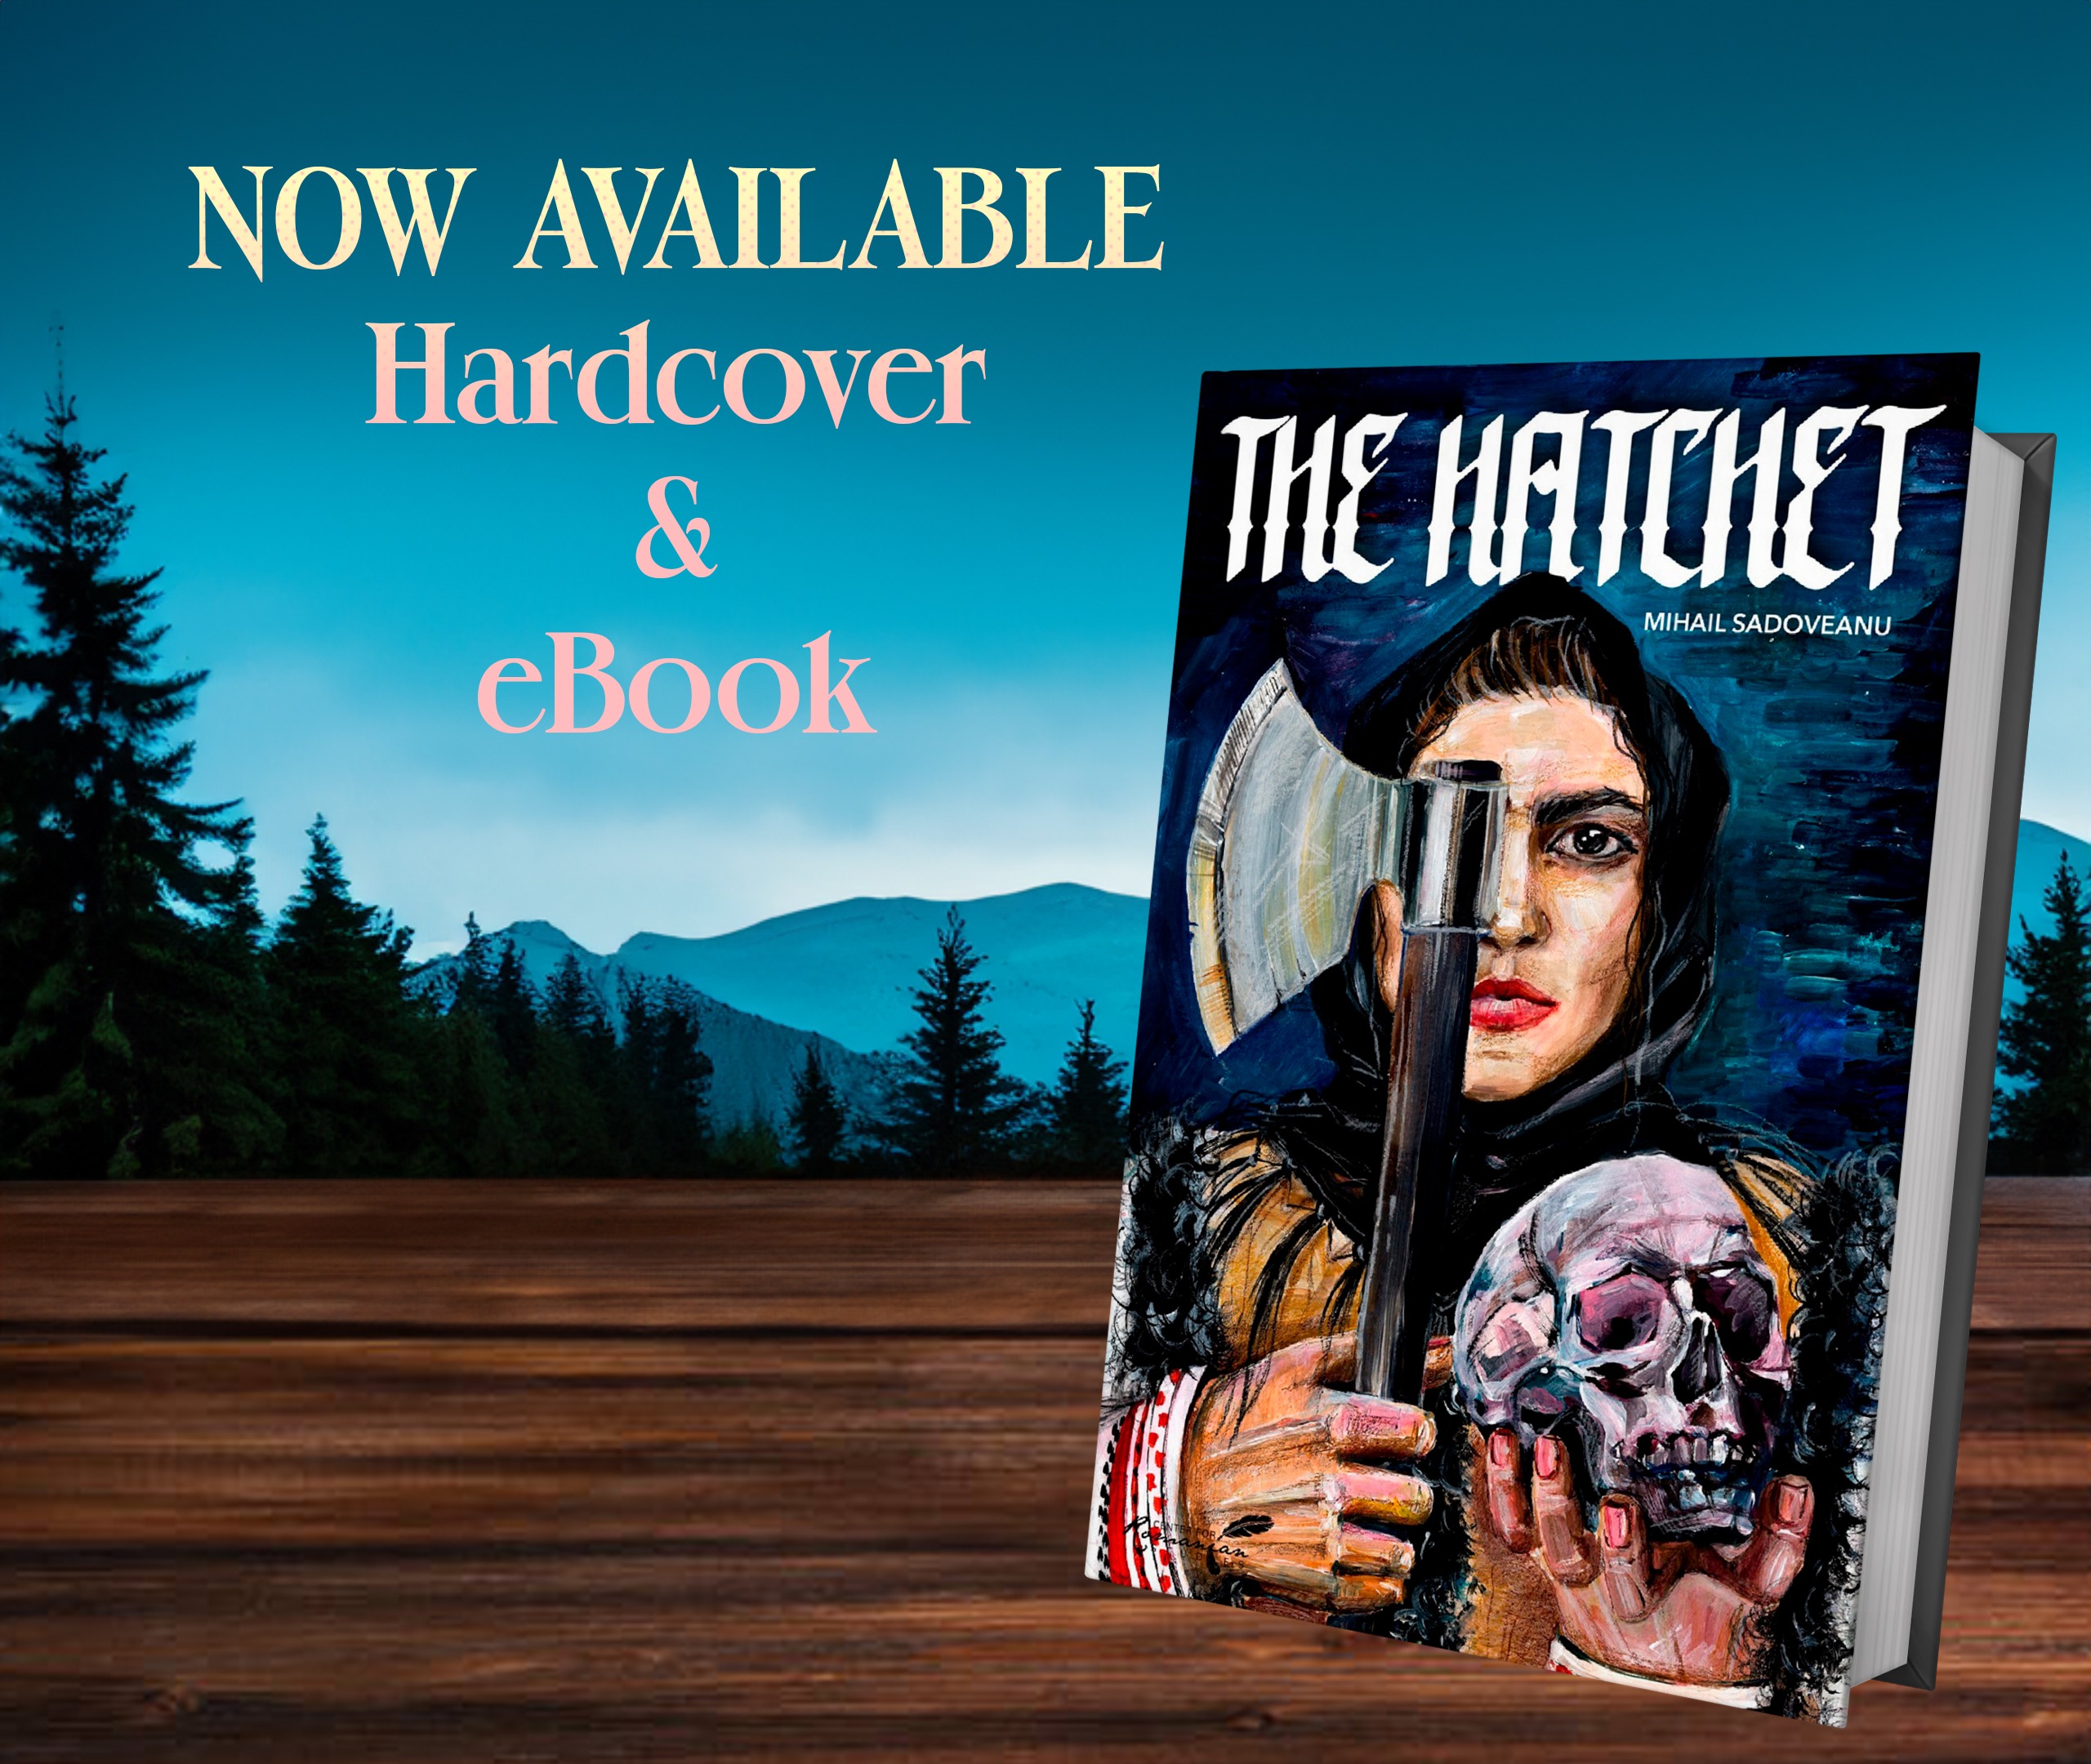 The Hatchet by Mihail Sadoveanu, available now from Histria Books